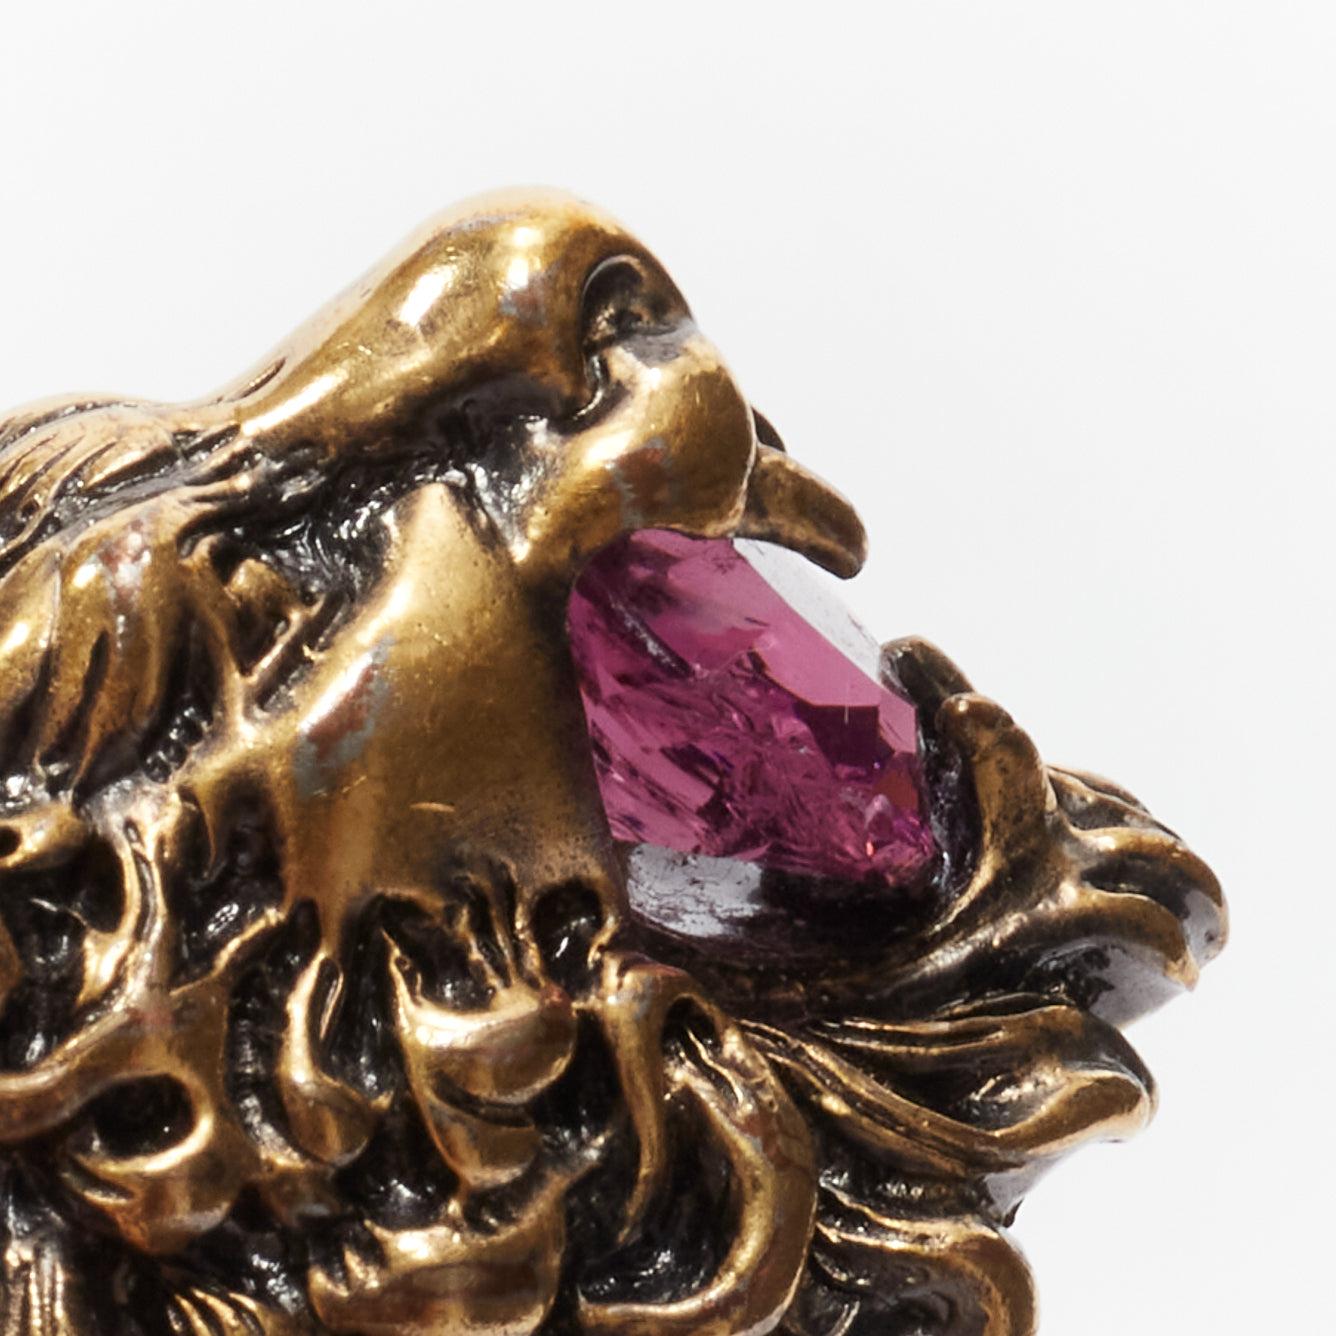 GUCCI Alessandro Michele gold lion purple crystal oversized cocktail ring Sz0
Reference: BSHW/A00123
Brand: Gucci
Designer: Alessandro Michele
Material: Metal, Plastic
Color: Purple, Gold
Pattern: Solid
Closure: Pull On
Lining: Gold Metal
Extra